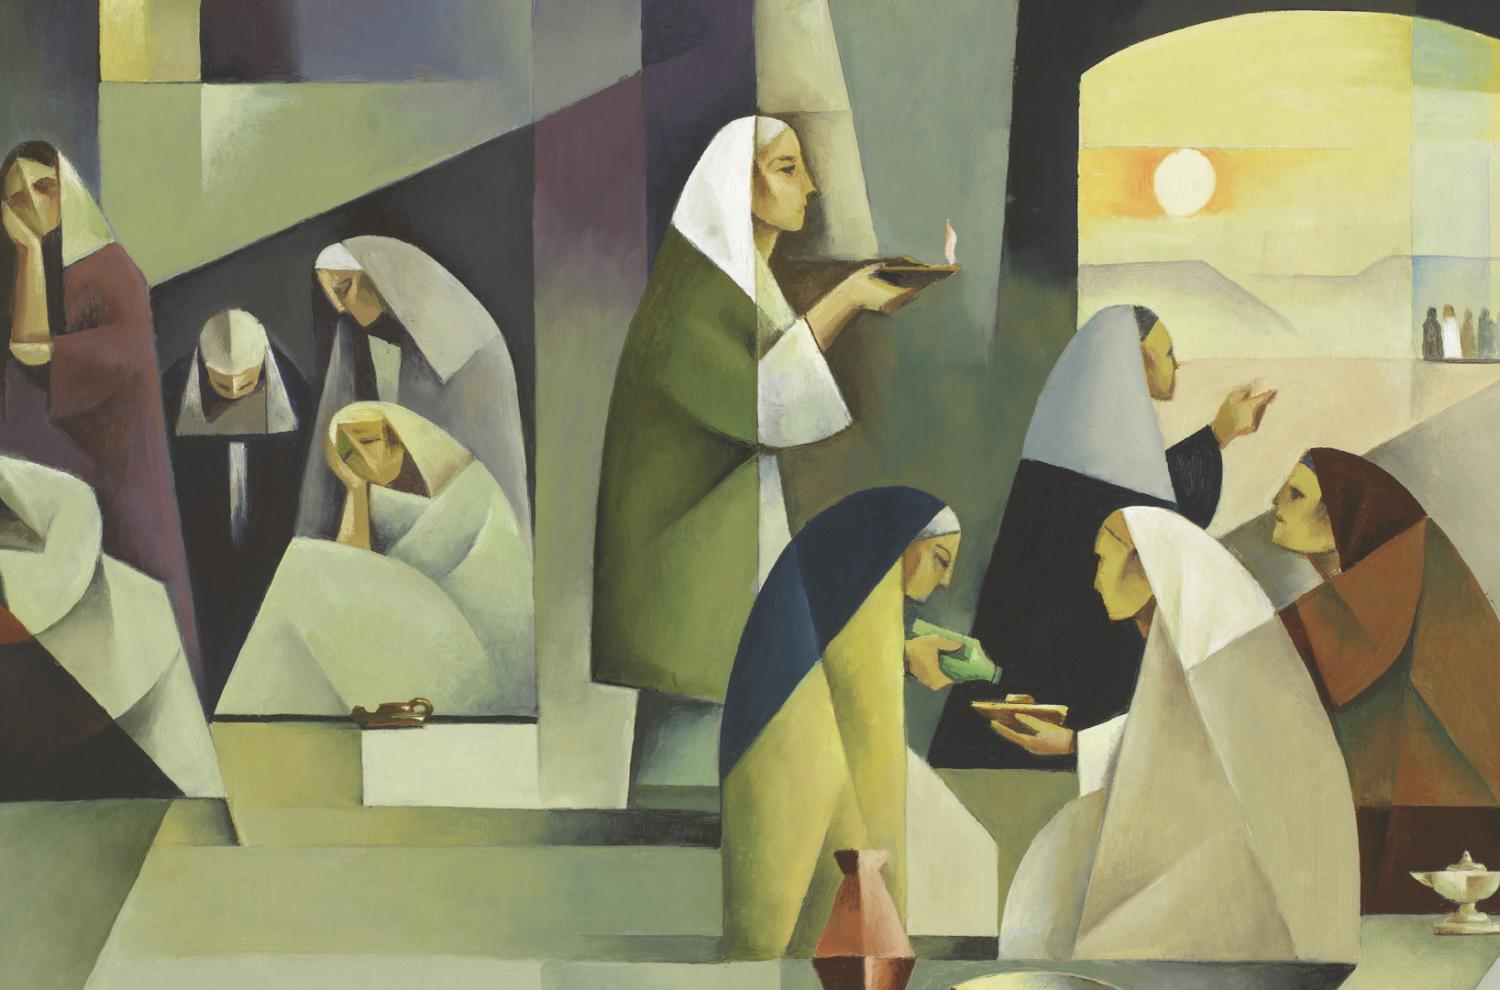 "The Ten Virgins," by Jorge Cocco, shows the wise virgins from Jesus' parable, with oil in their lamps and vessels, and the foolish virgins, who were not prepared with oil.